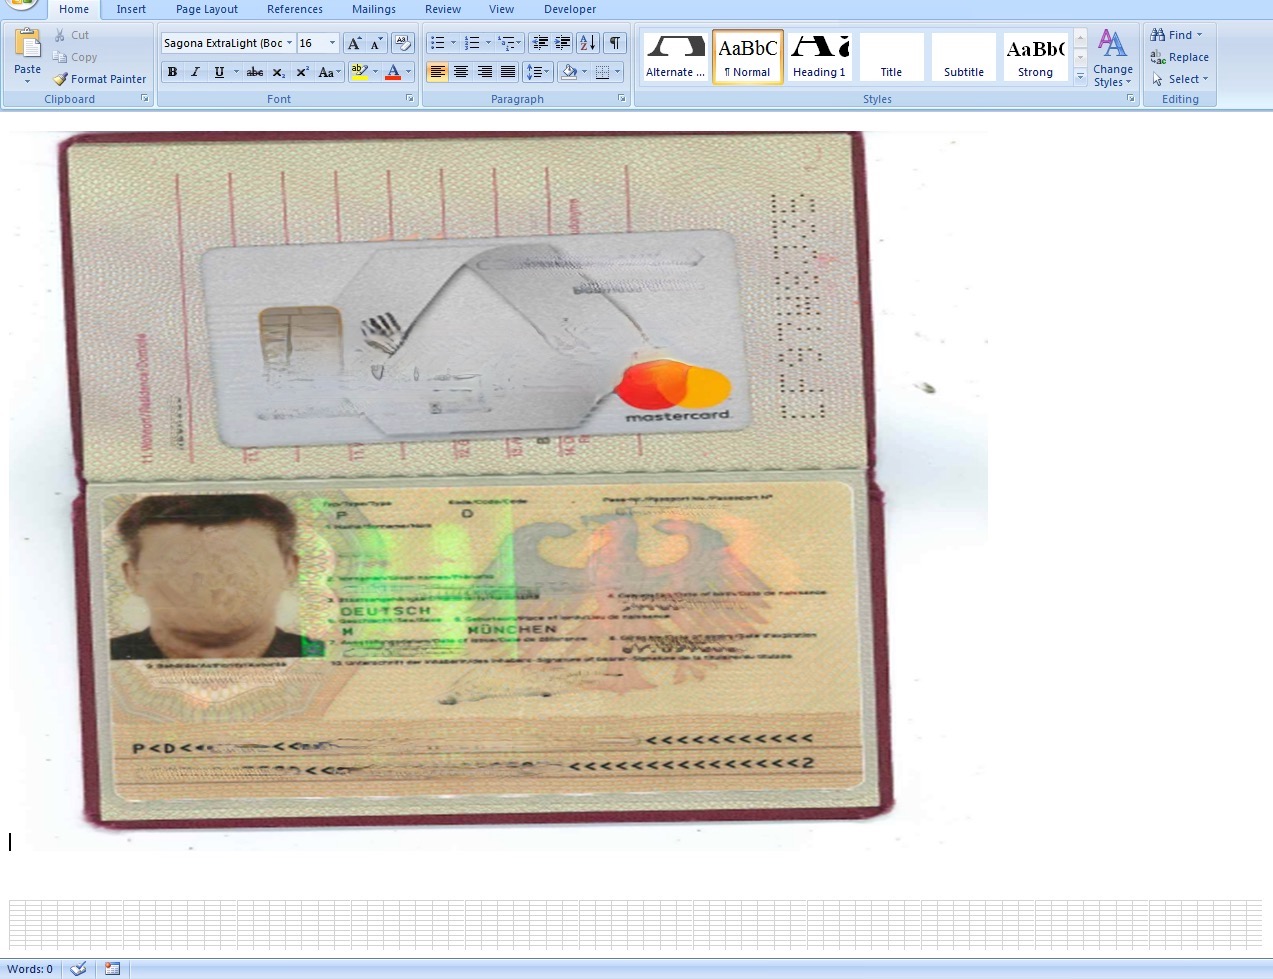 The Microsoft Word document displays a photo of a passport for a German citizen, along with a credit card. Numerous Excel worksheets appear below the image. 